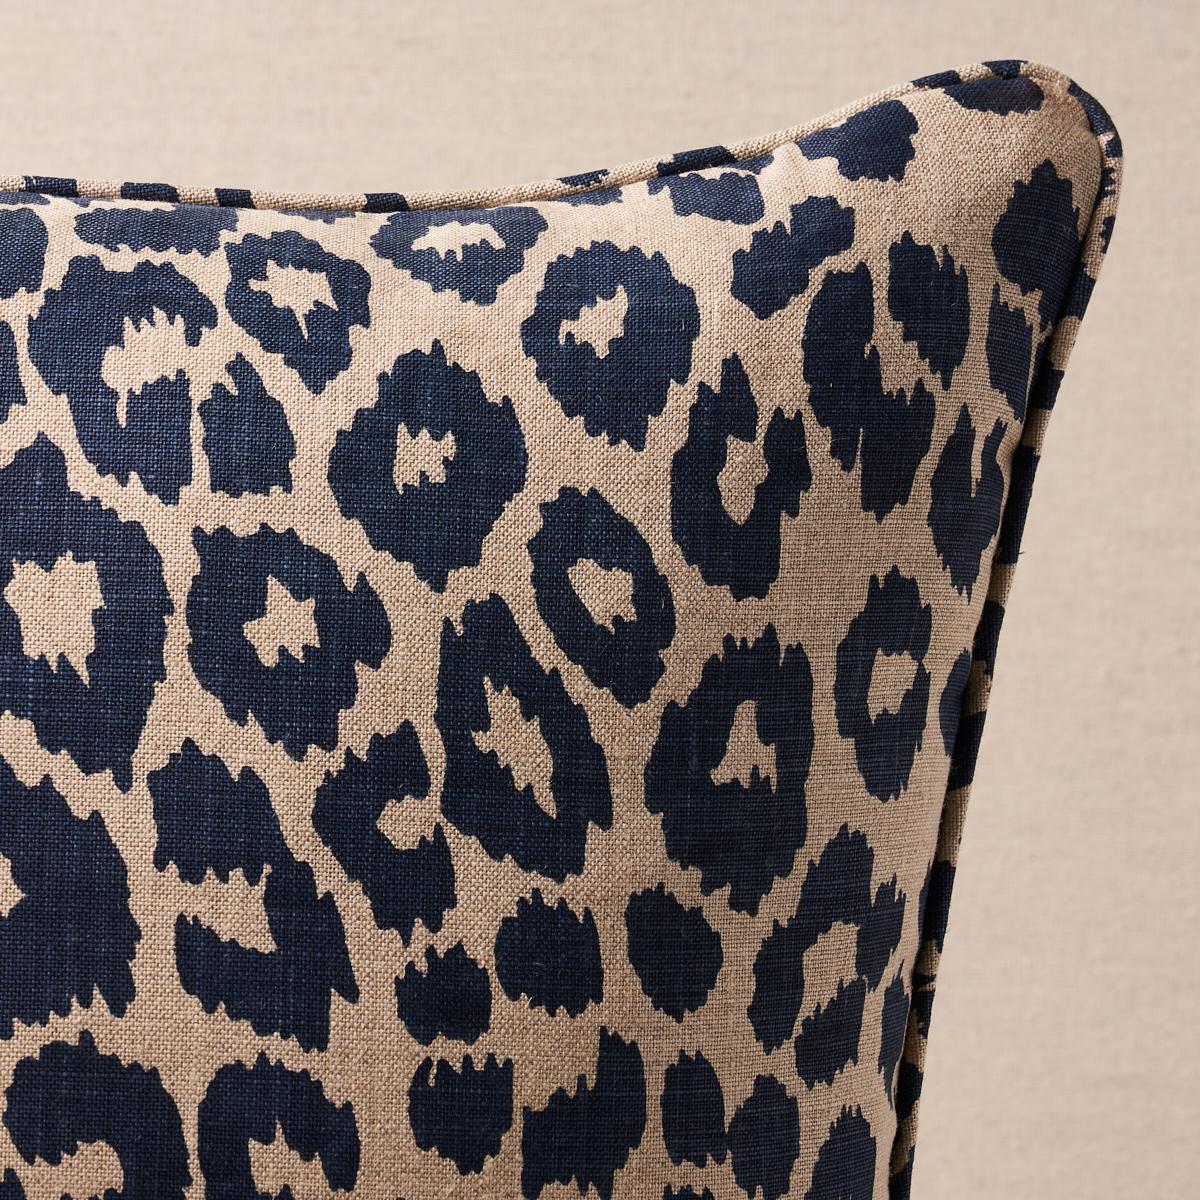 This pillow features Iconic Leopard with a self welt finish. We first introduced this sexy pattern in the 1970s. In 11 versatile colors, it's eternally chic. Pillow includes a feather/down fill insert and hidden zip closure.
